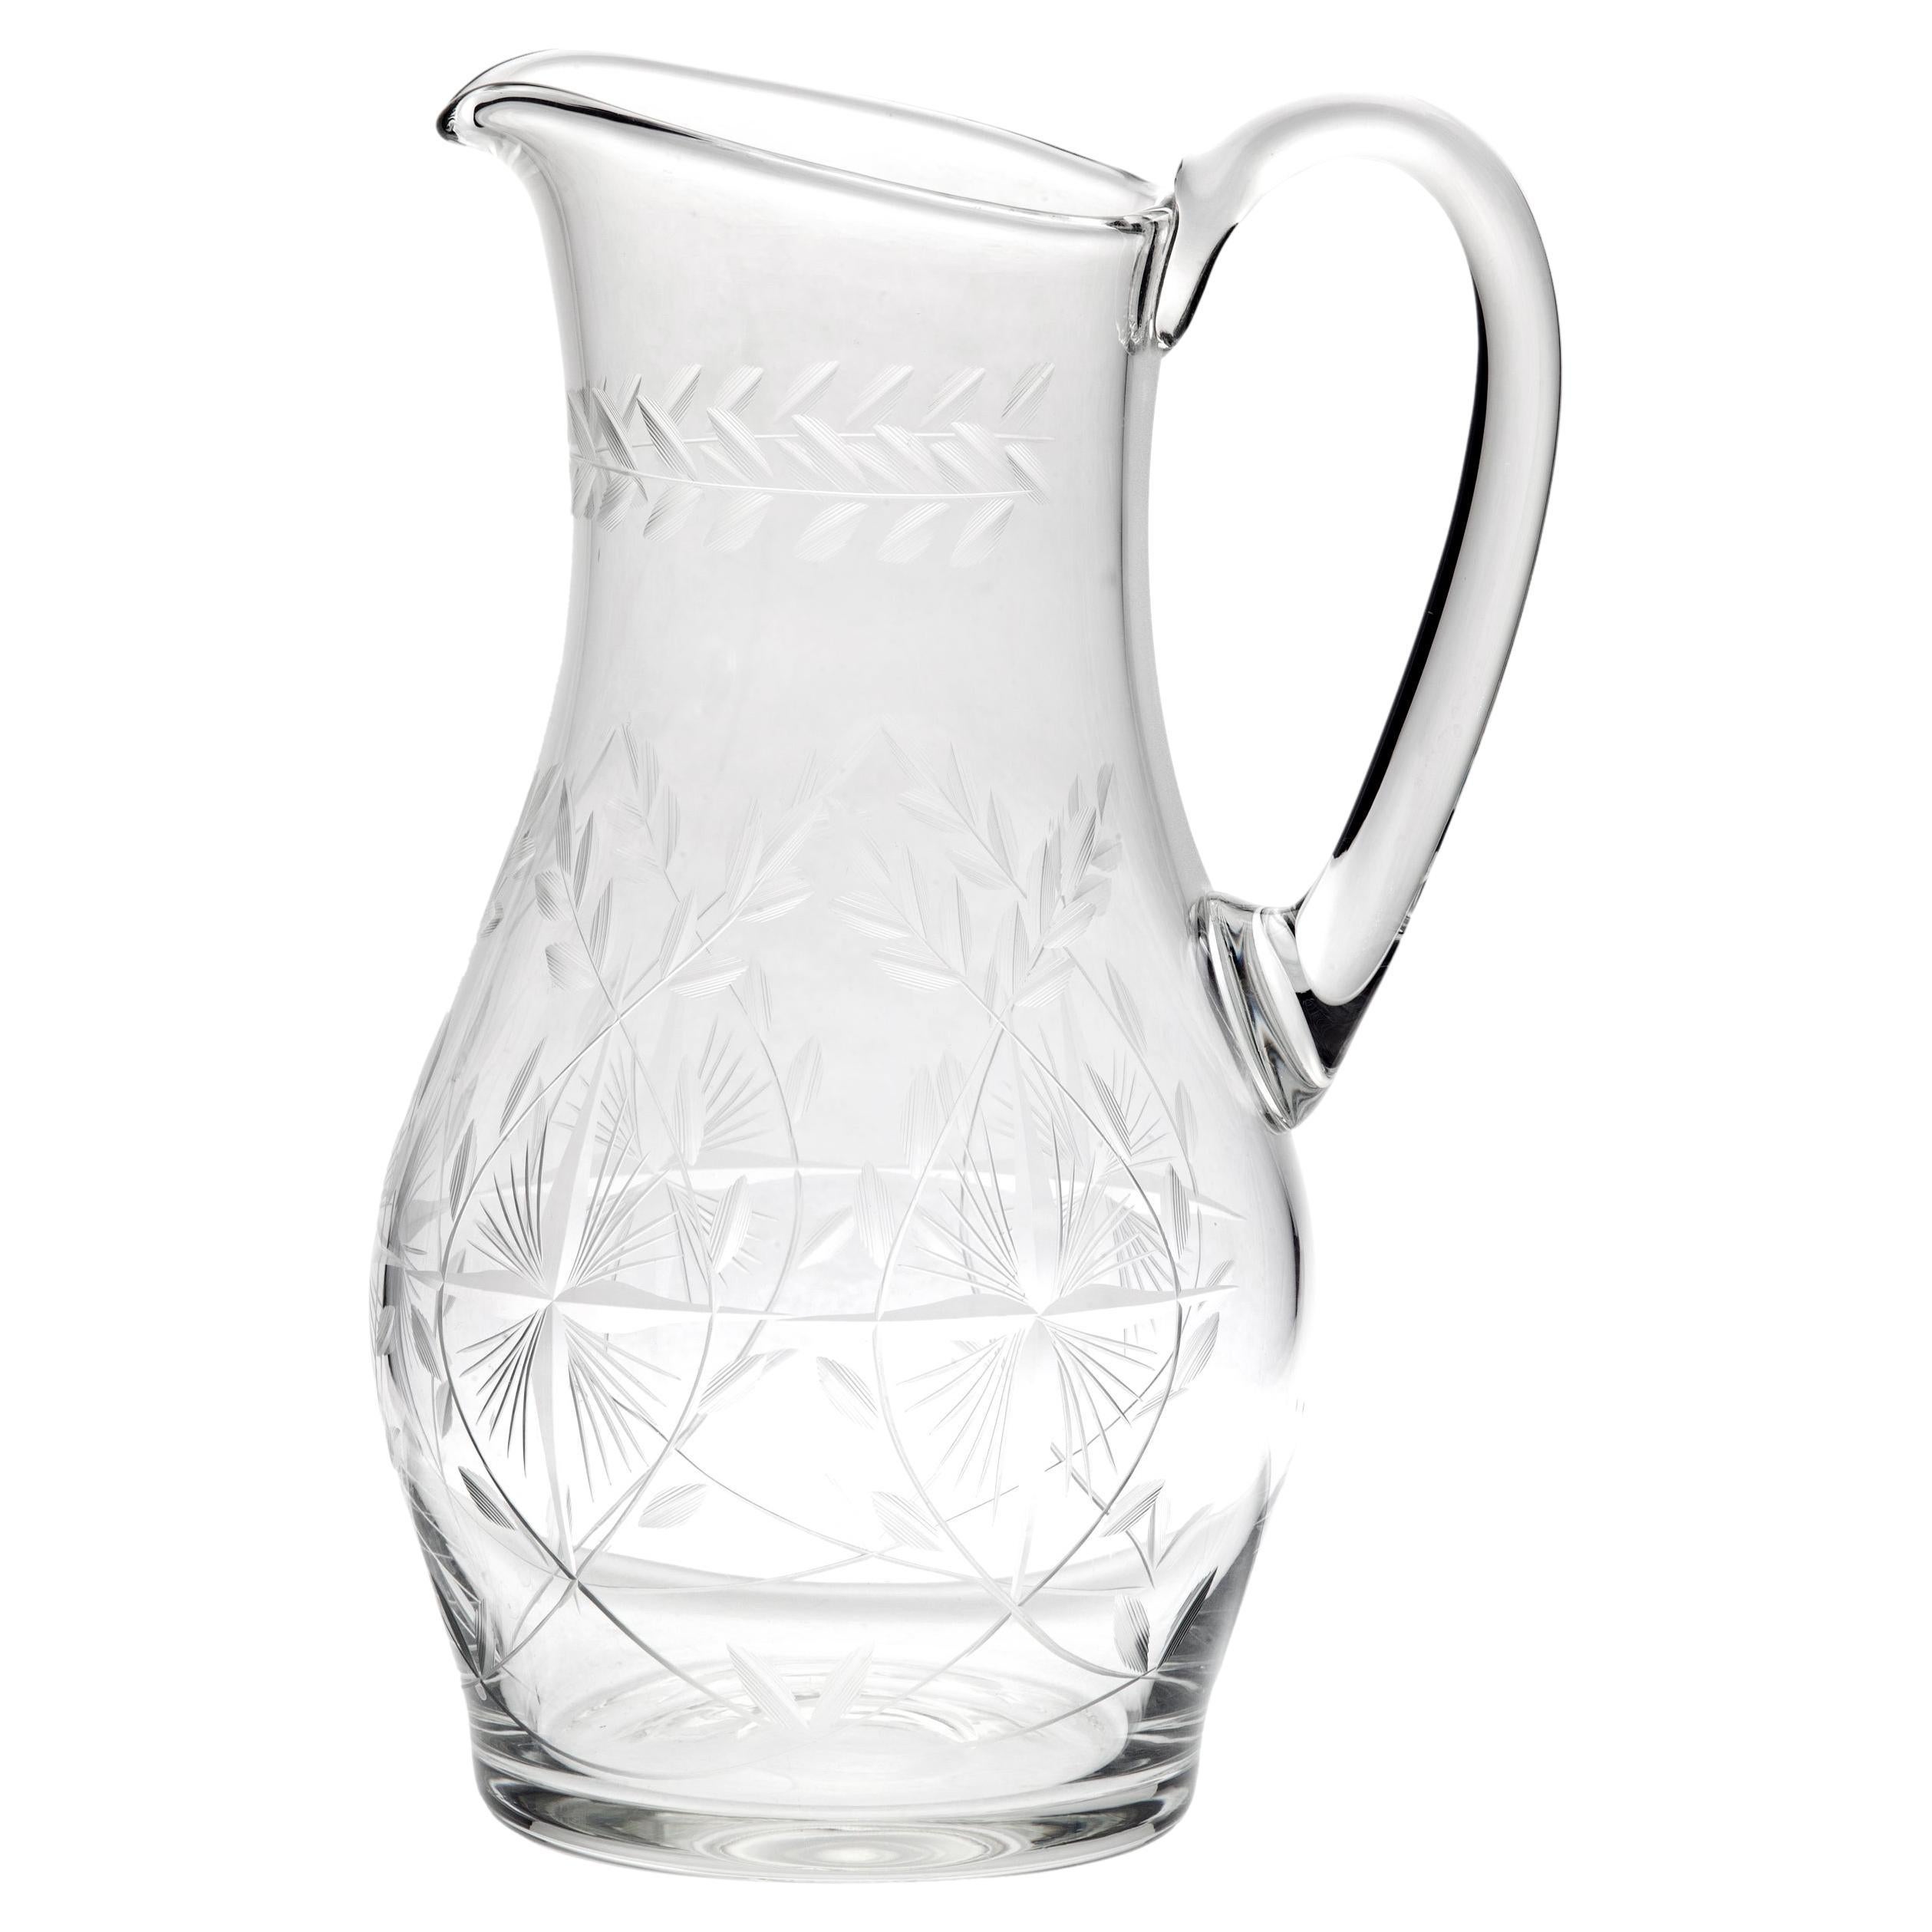 Crystal Faceted Water Pitcher with Lid Made in Belarus USSR Style 1.2 L 